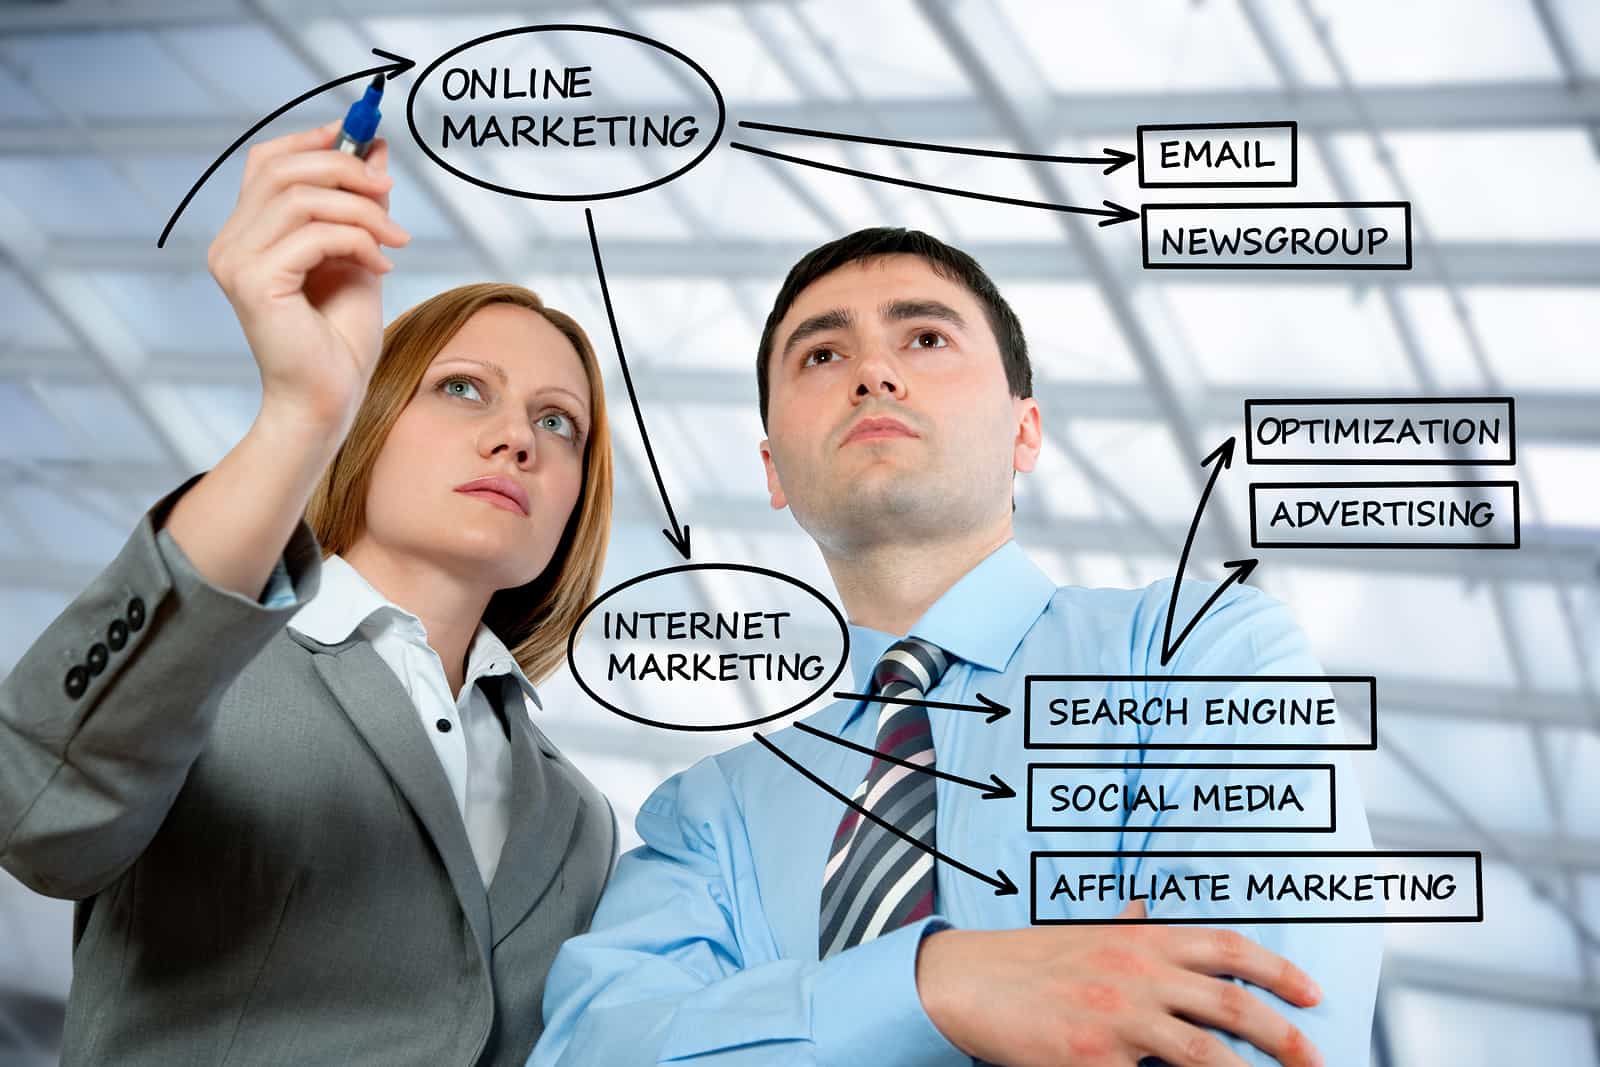 Your search for Online Marketing Company Melbourne ends here